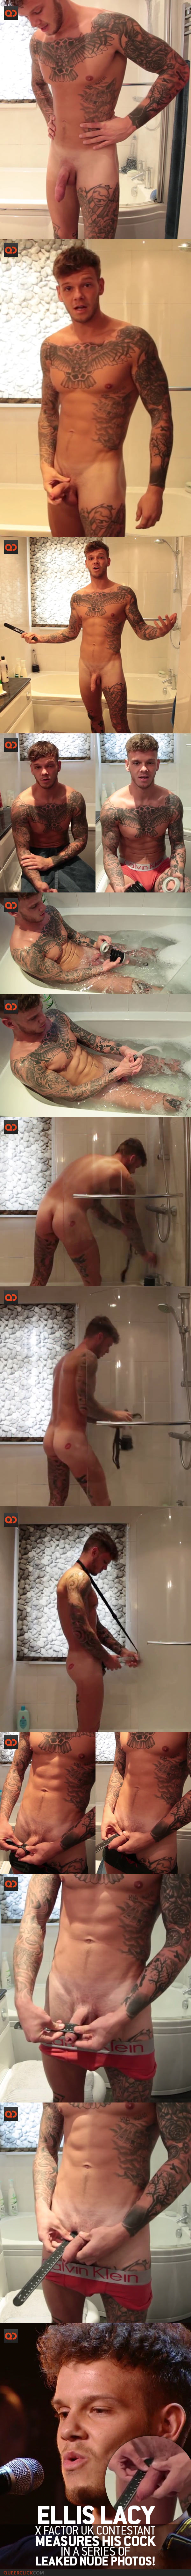 Ellis Lacy, X Factor UK Contestant, Measures His Cock In A Series Of Leaked Nude Photos!